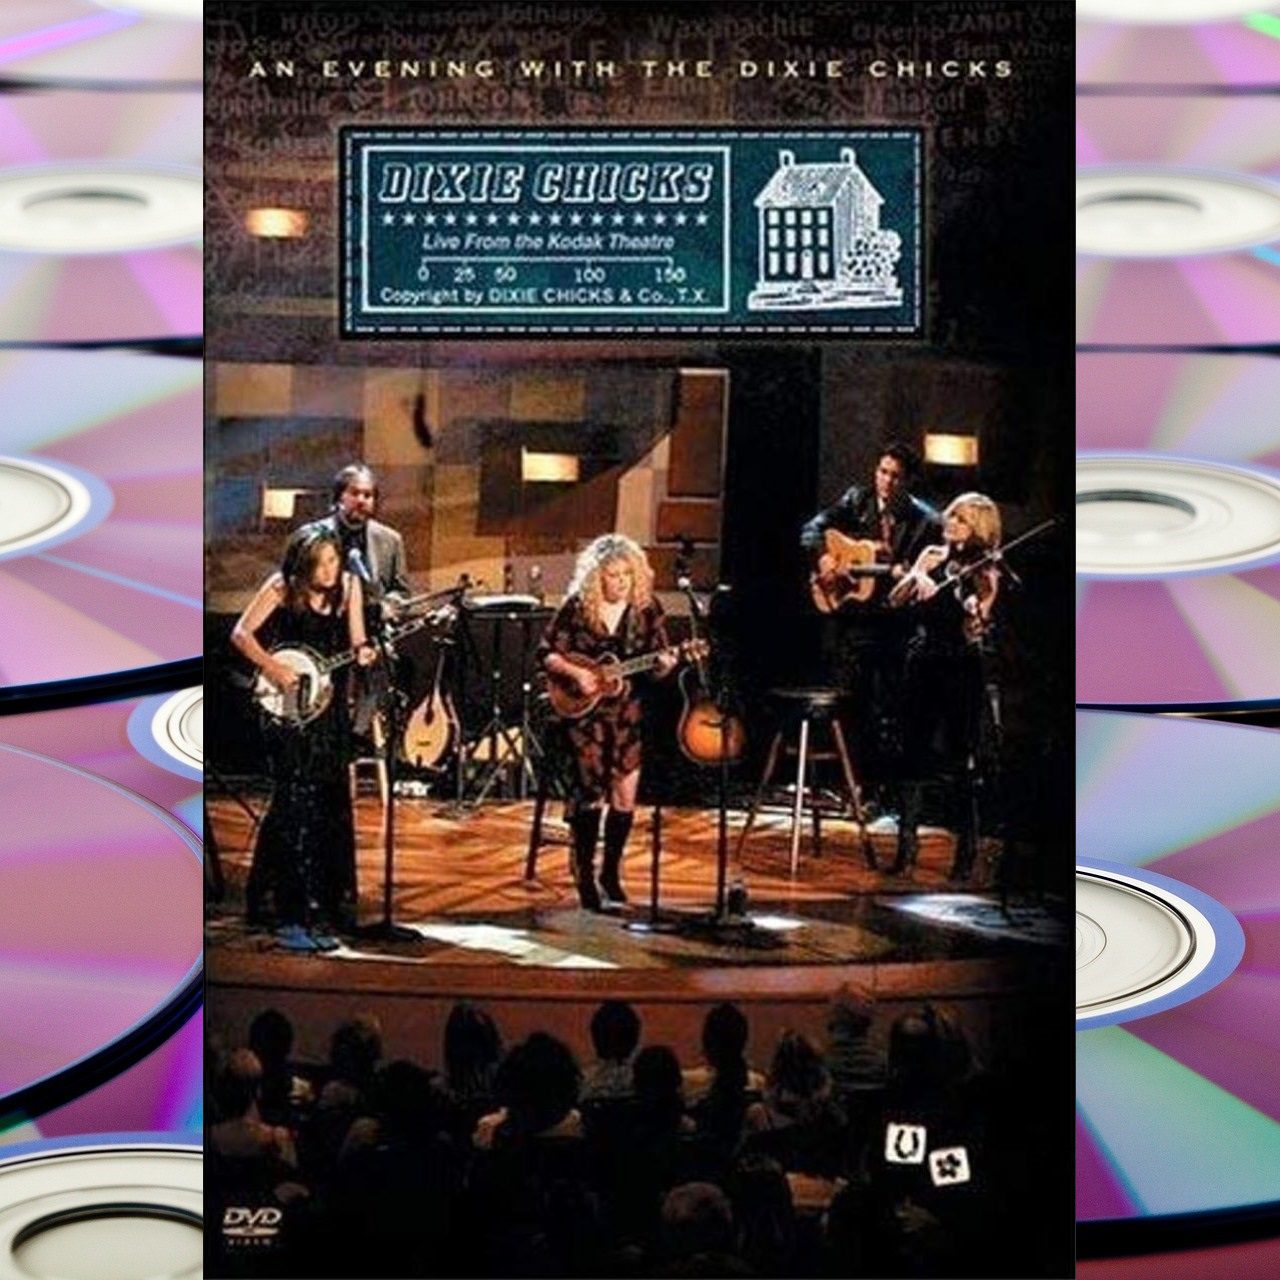 Dixie Chicks - An Evening With Dixie Chicks (DVD